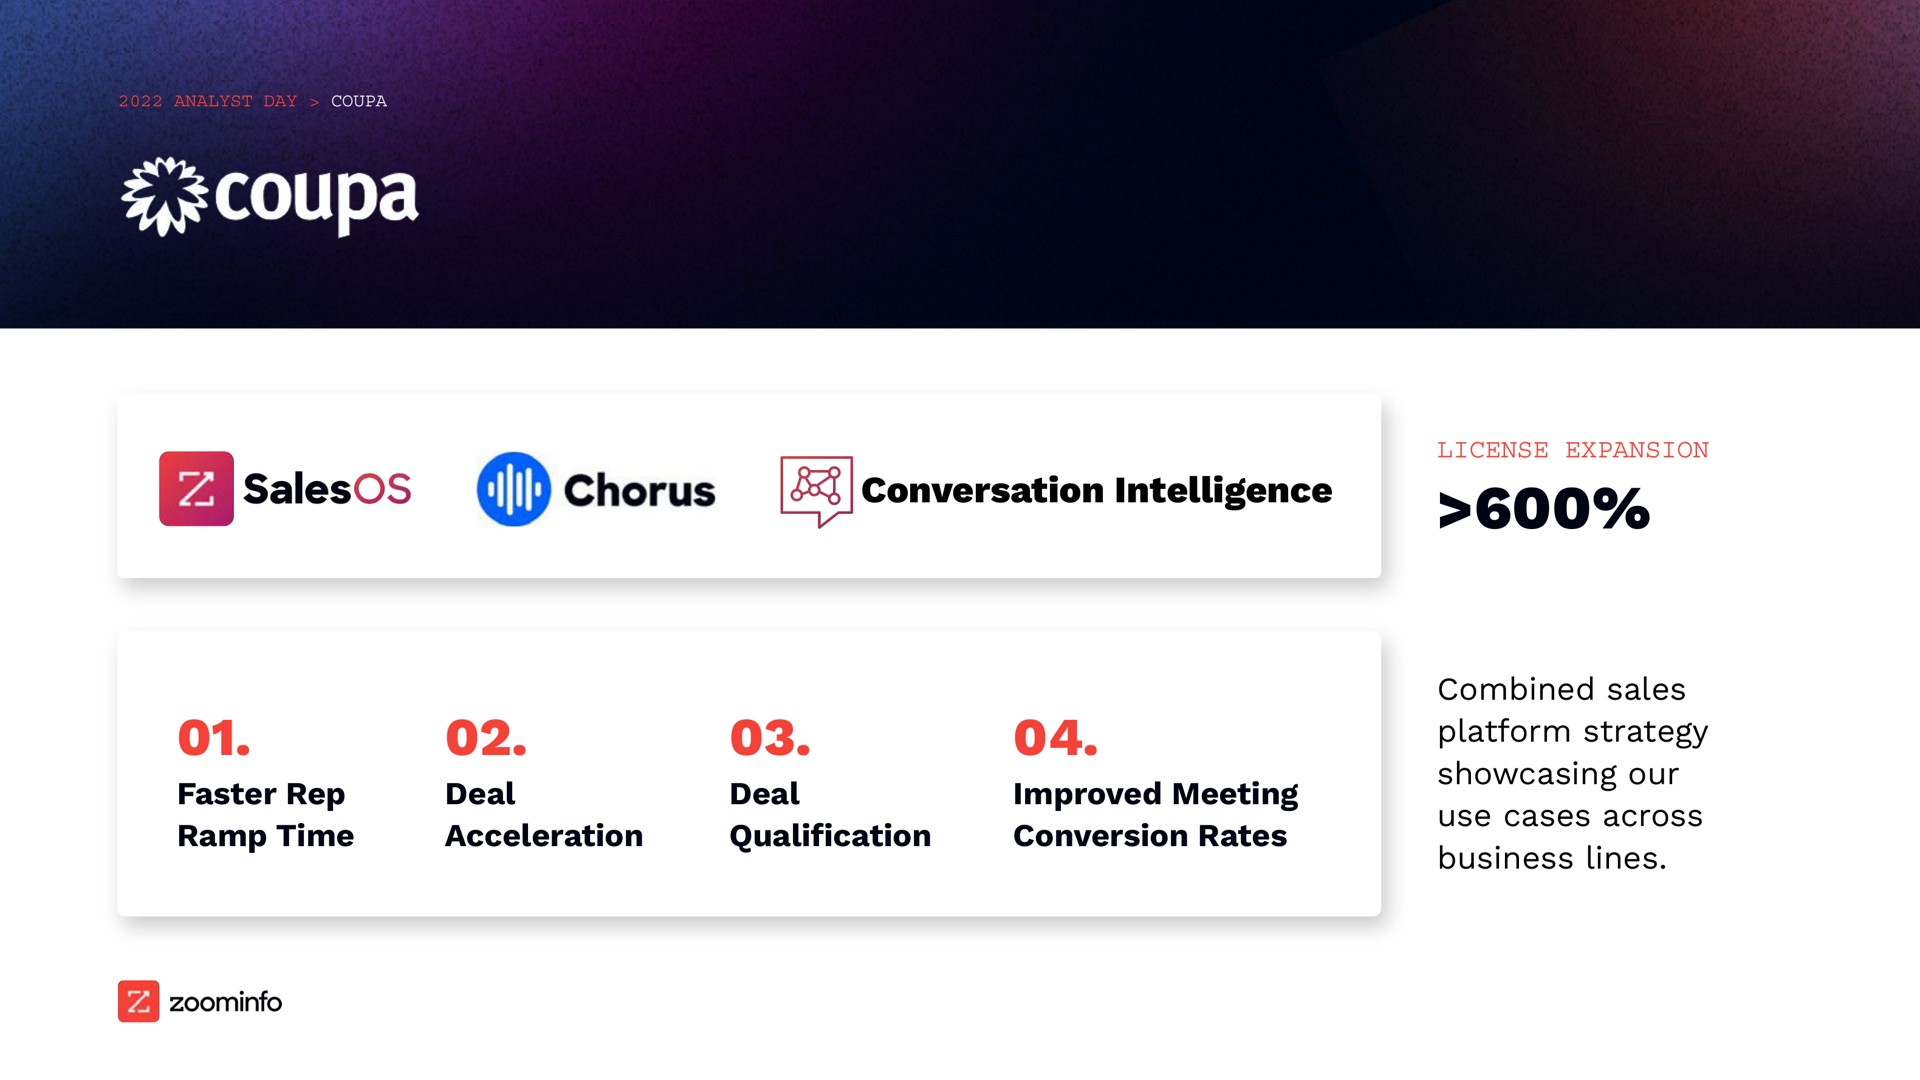 conversation intelligence faster rep ramp time deal acceleration deal cation improved meeting conversion rates combined sales platform strategy our use cases across business lines chorus | Zoominfo